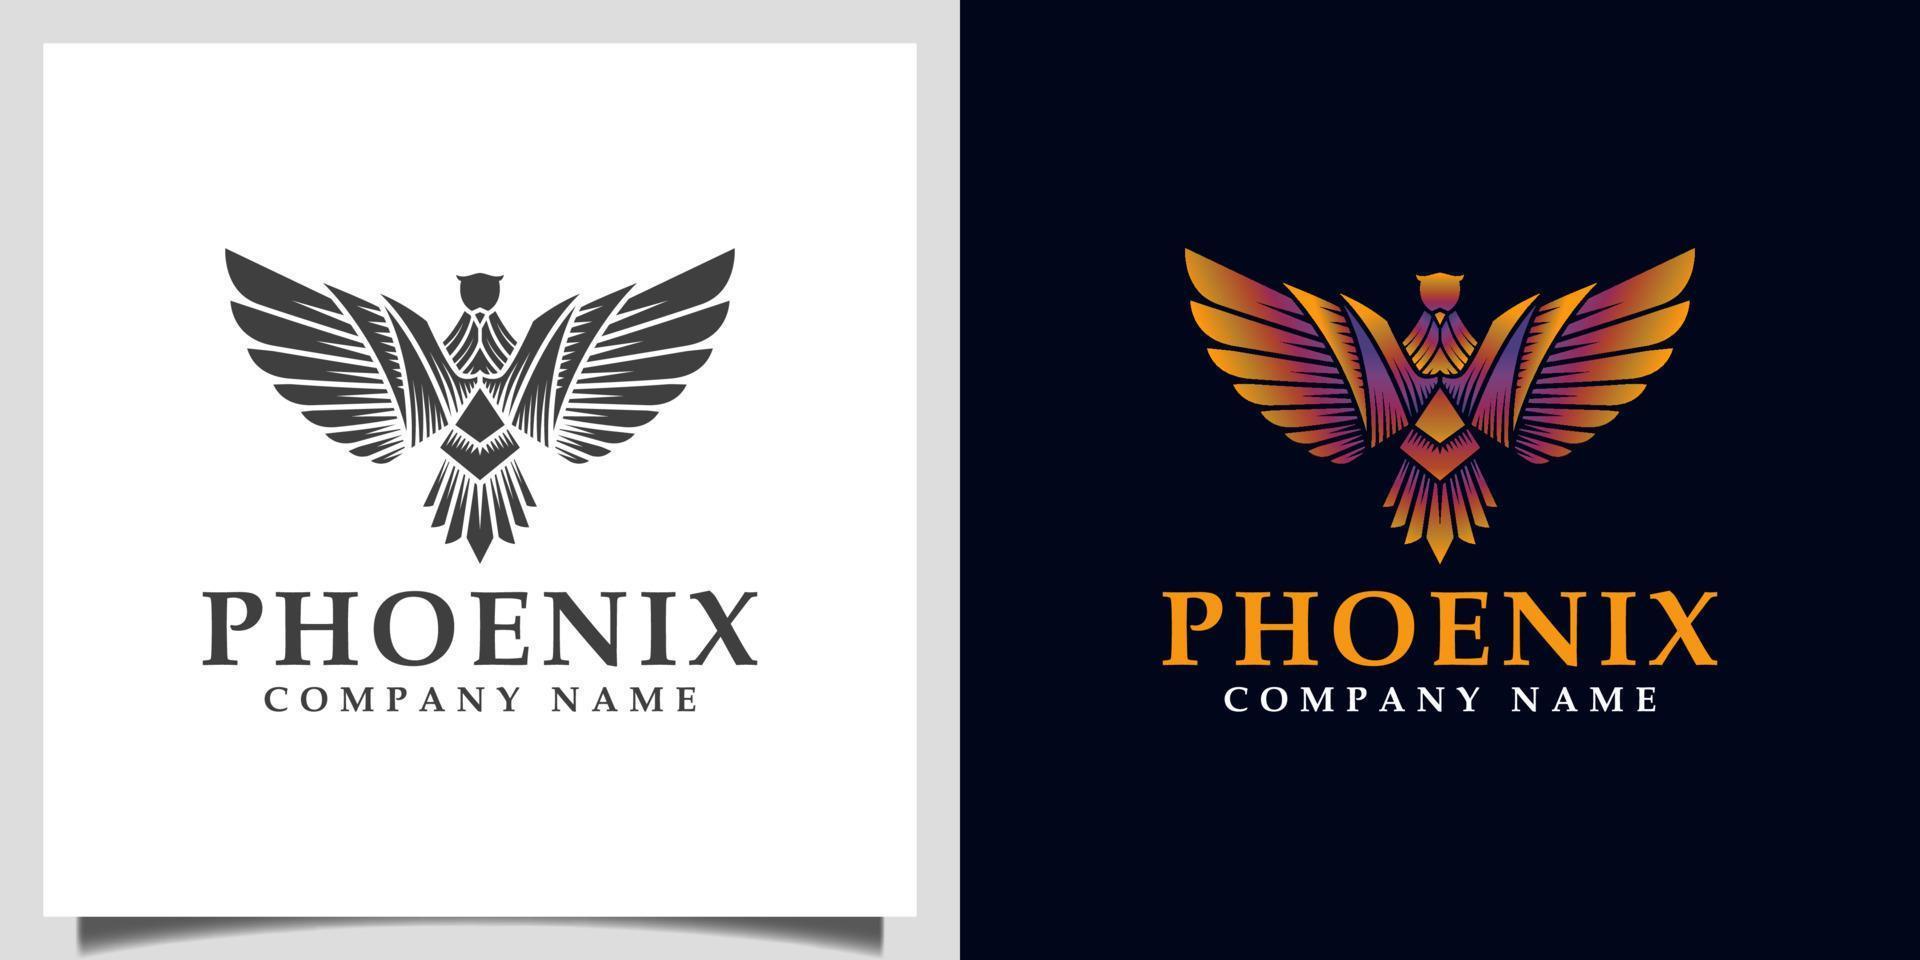 awesome phoenix, eagle, falcon wings symbol vector gradient logo illustration with silhouette logo design